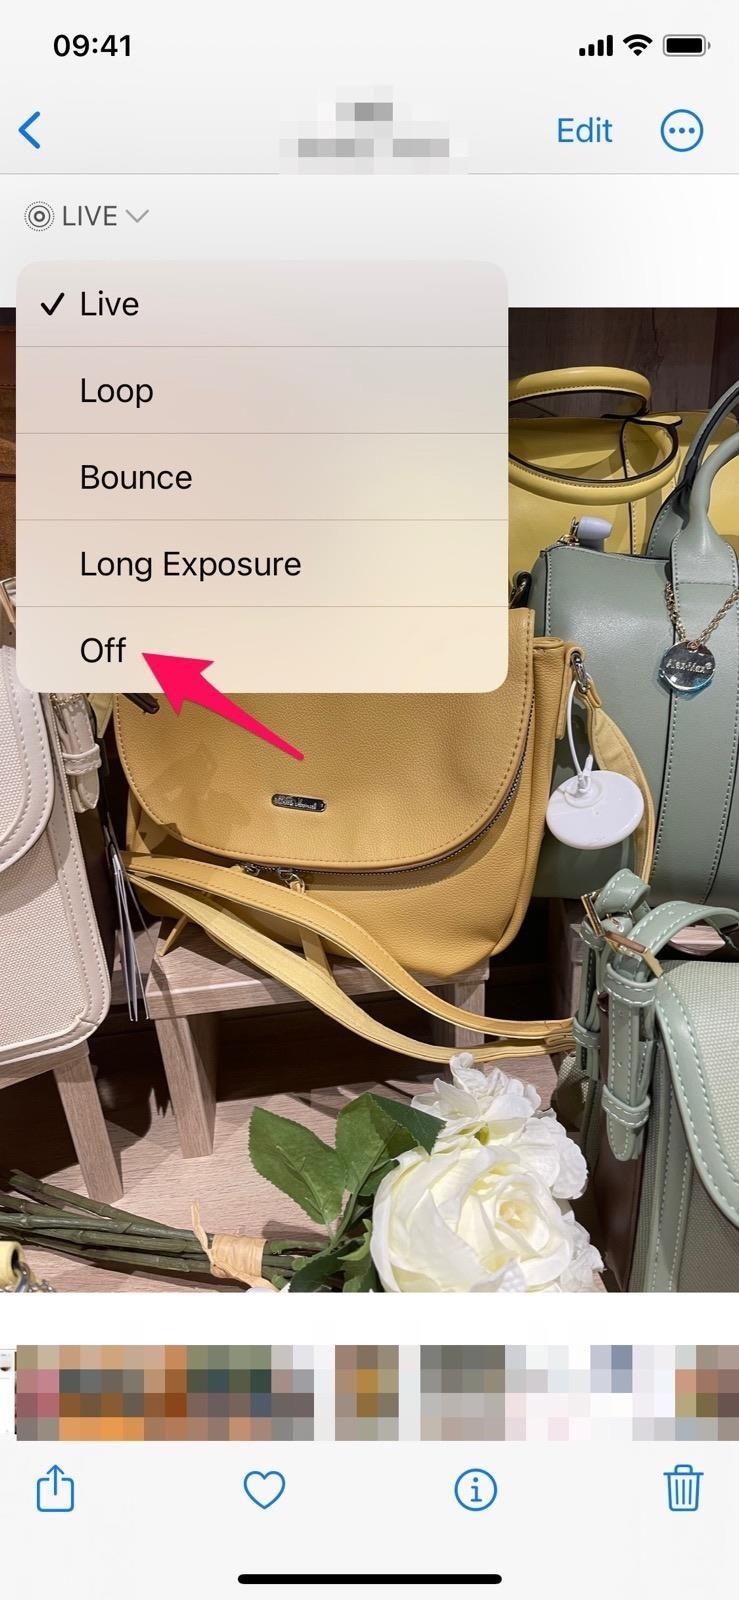 Apple Photos Has 20 New Features for iPhone That Make Your Life Easier